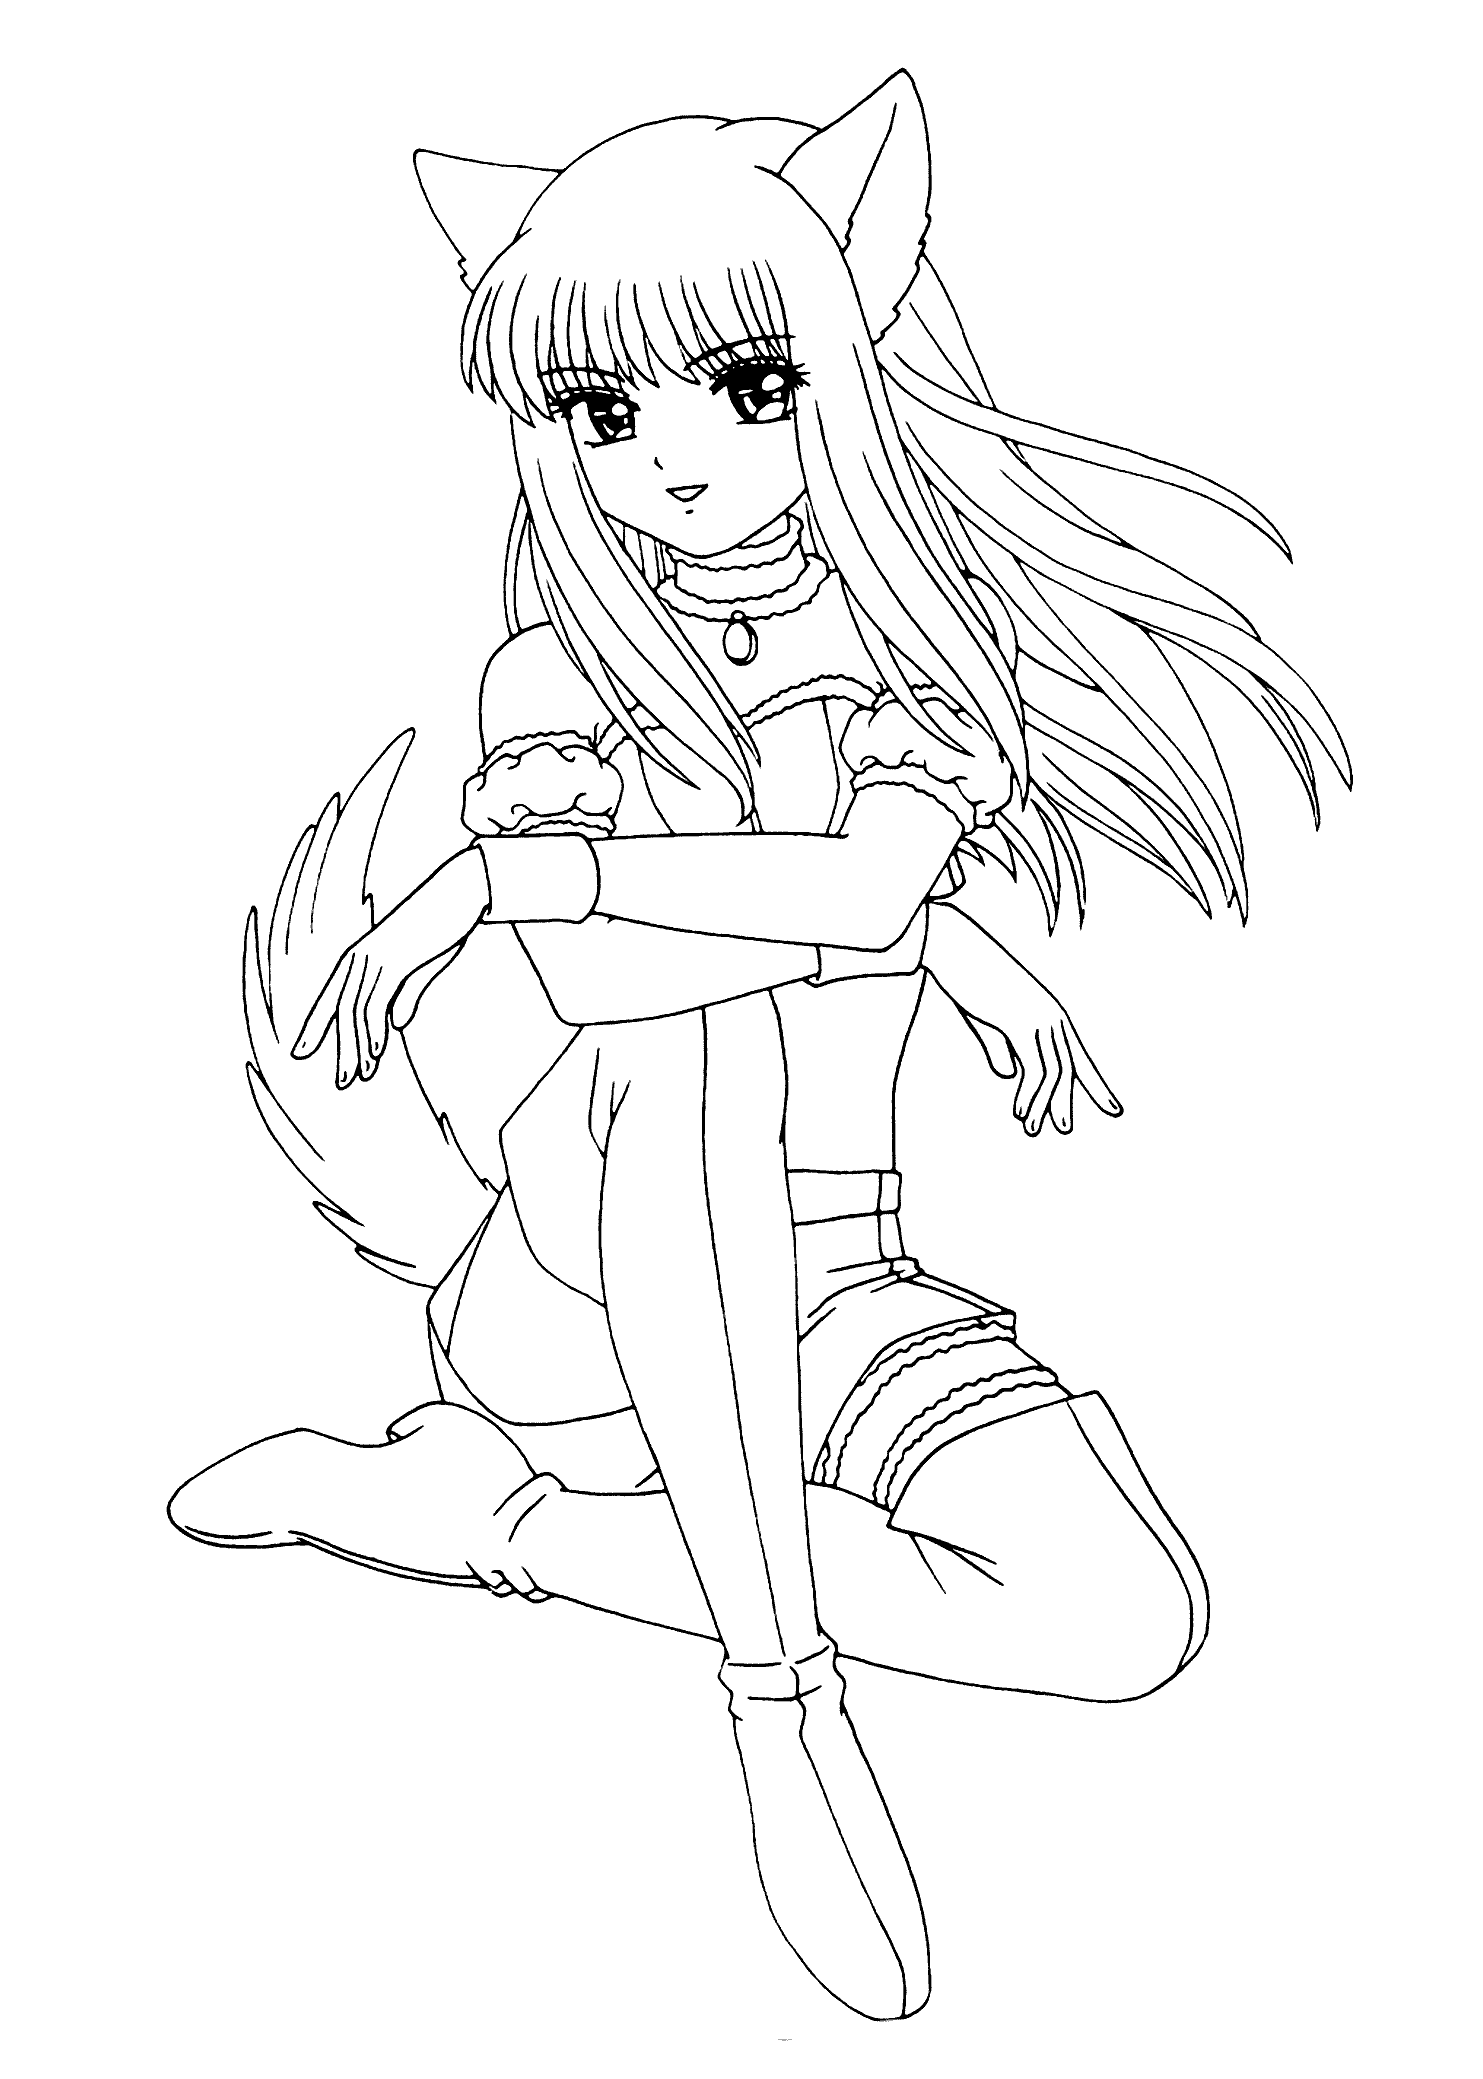 anime colouring manga coloring pages to download and print for free anime colouring 